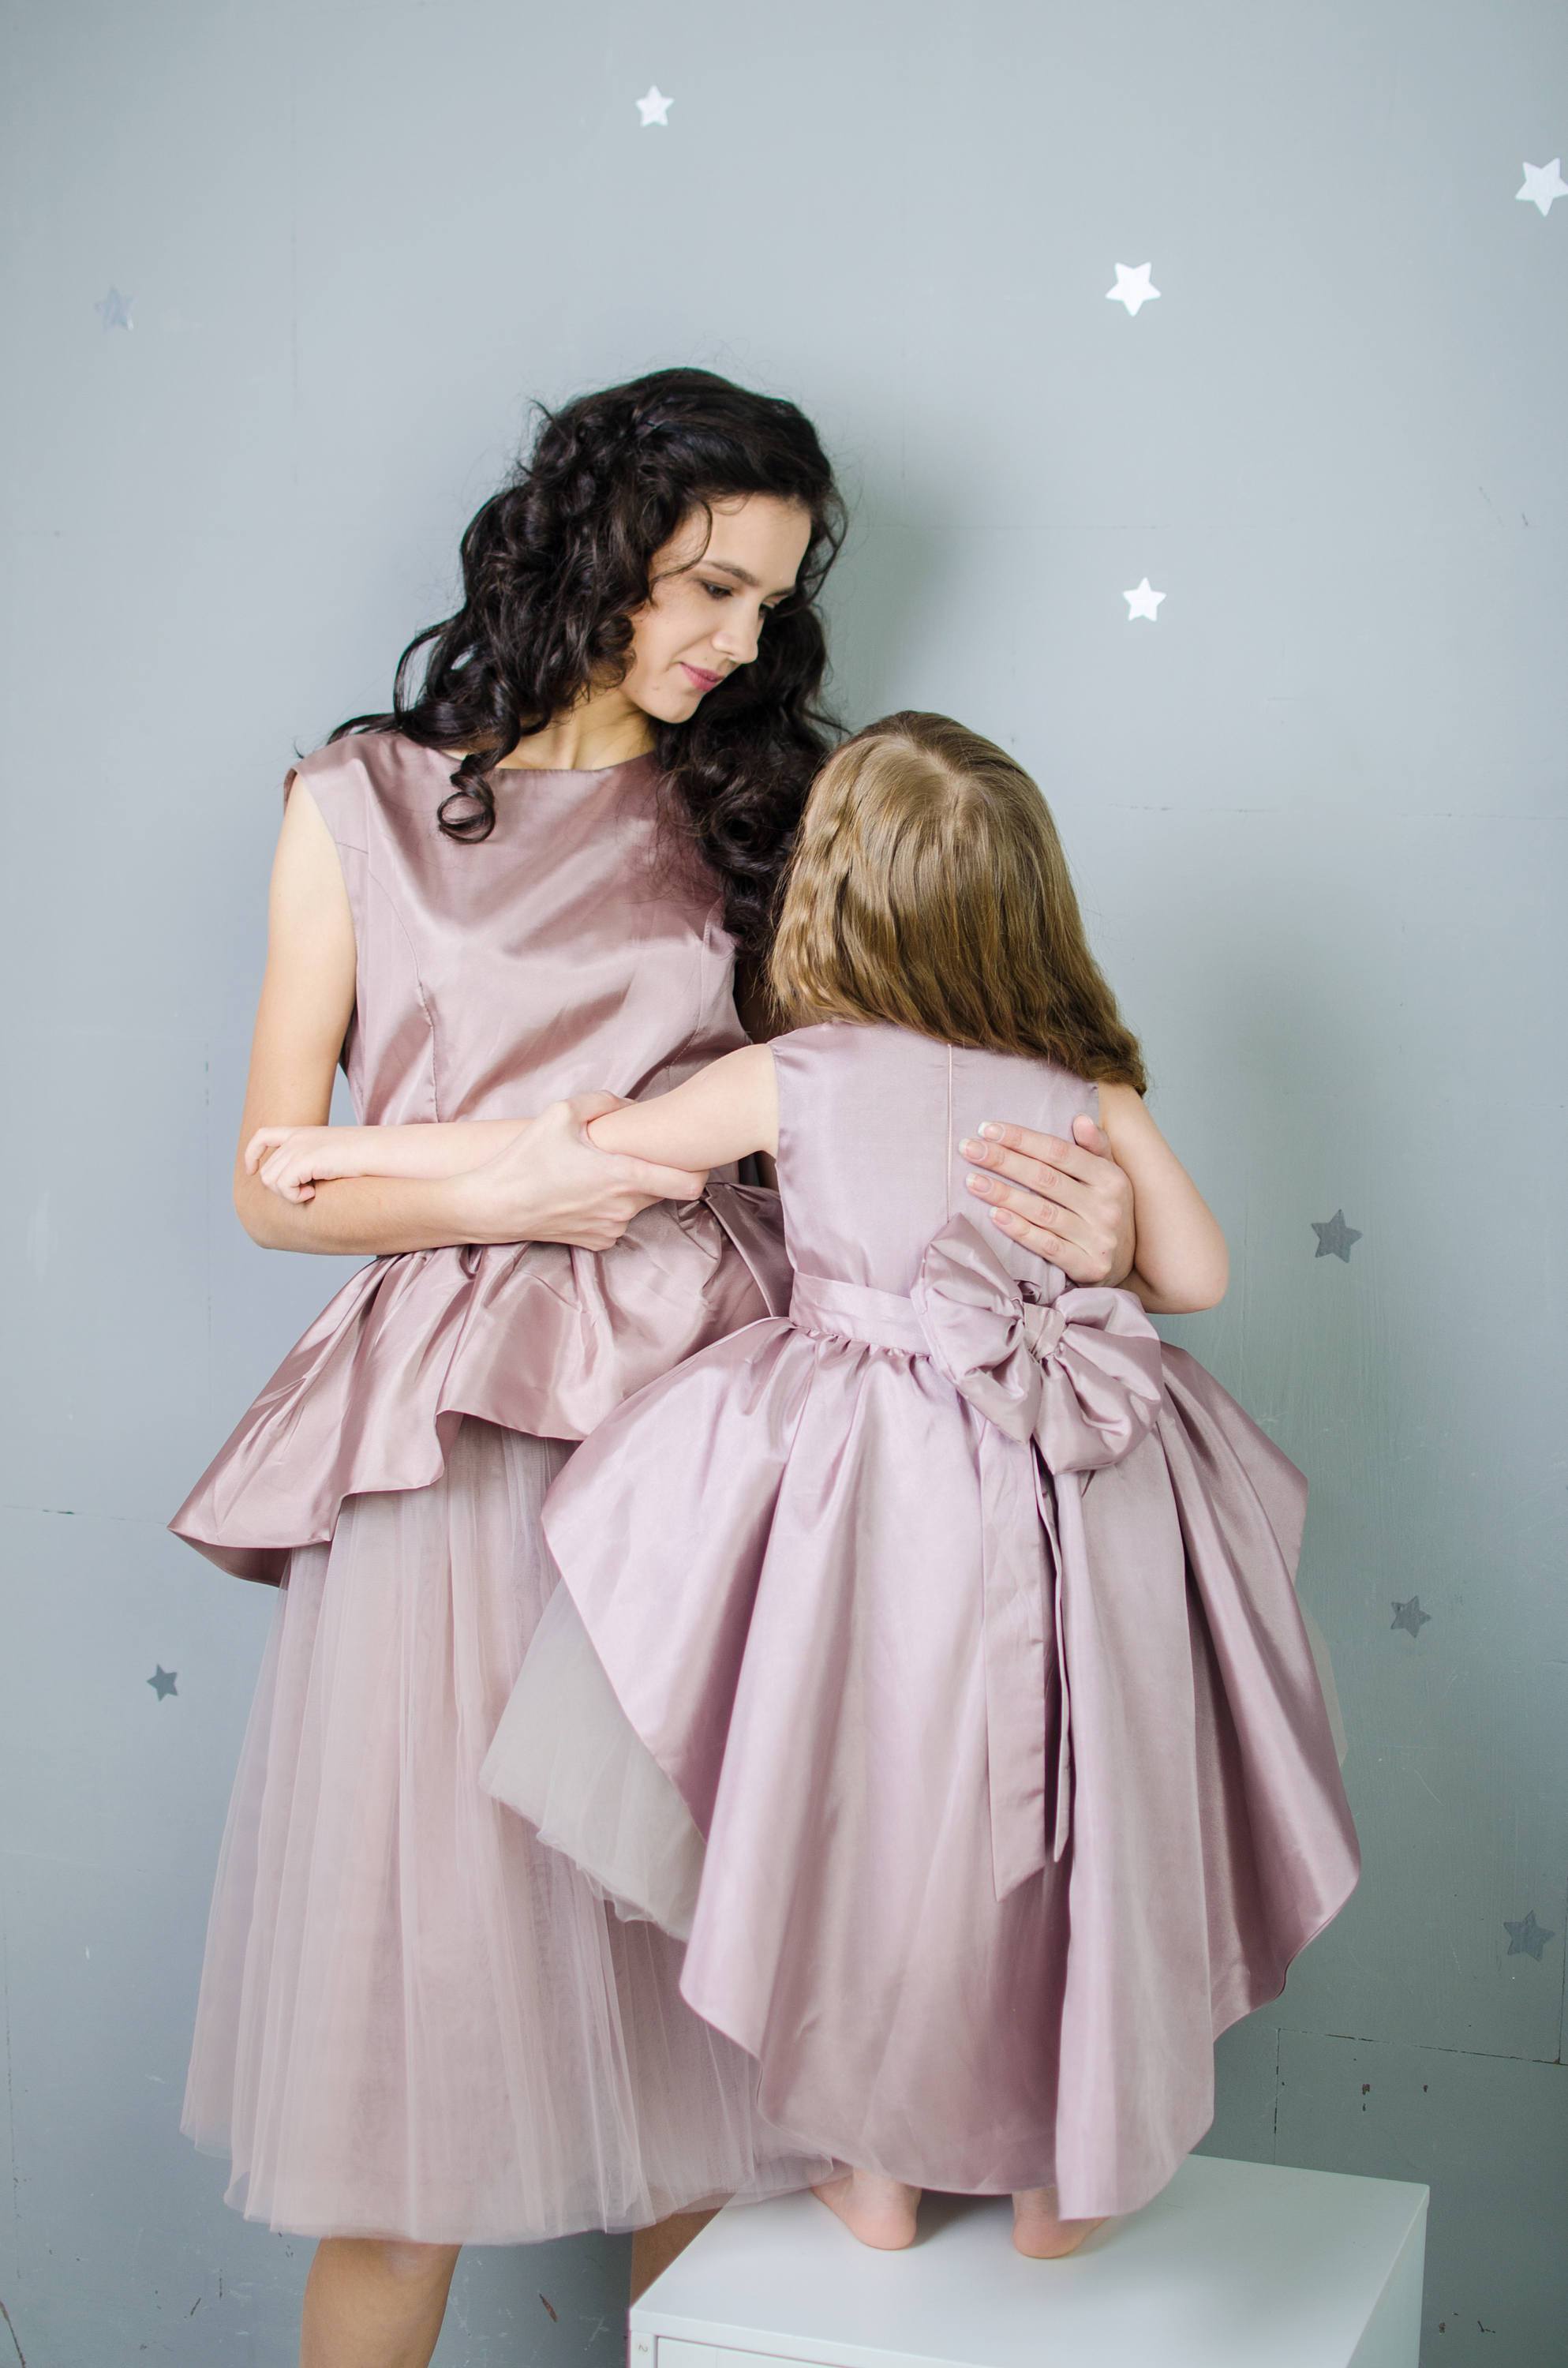 Mommy and Me Dress Formal, Mother Daughter Matching Dress, Photoshoot Dress,  Indigo Blue Gown Dress, Lace Wedding Outfit, Photography Dress - Etsy | Mother  daughter dresses matching, Mommy and me dresses, Photoshoot dress